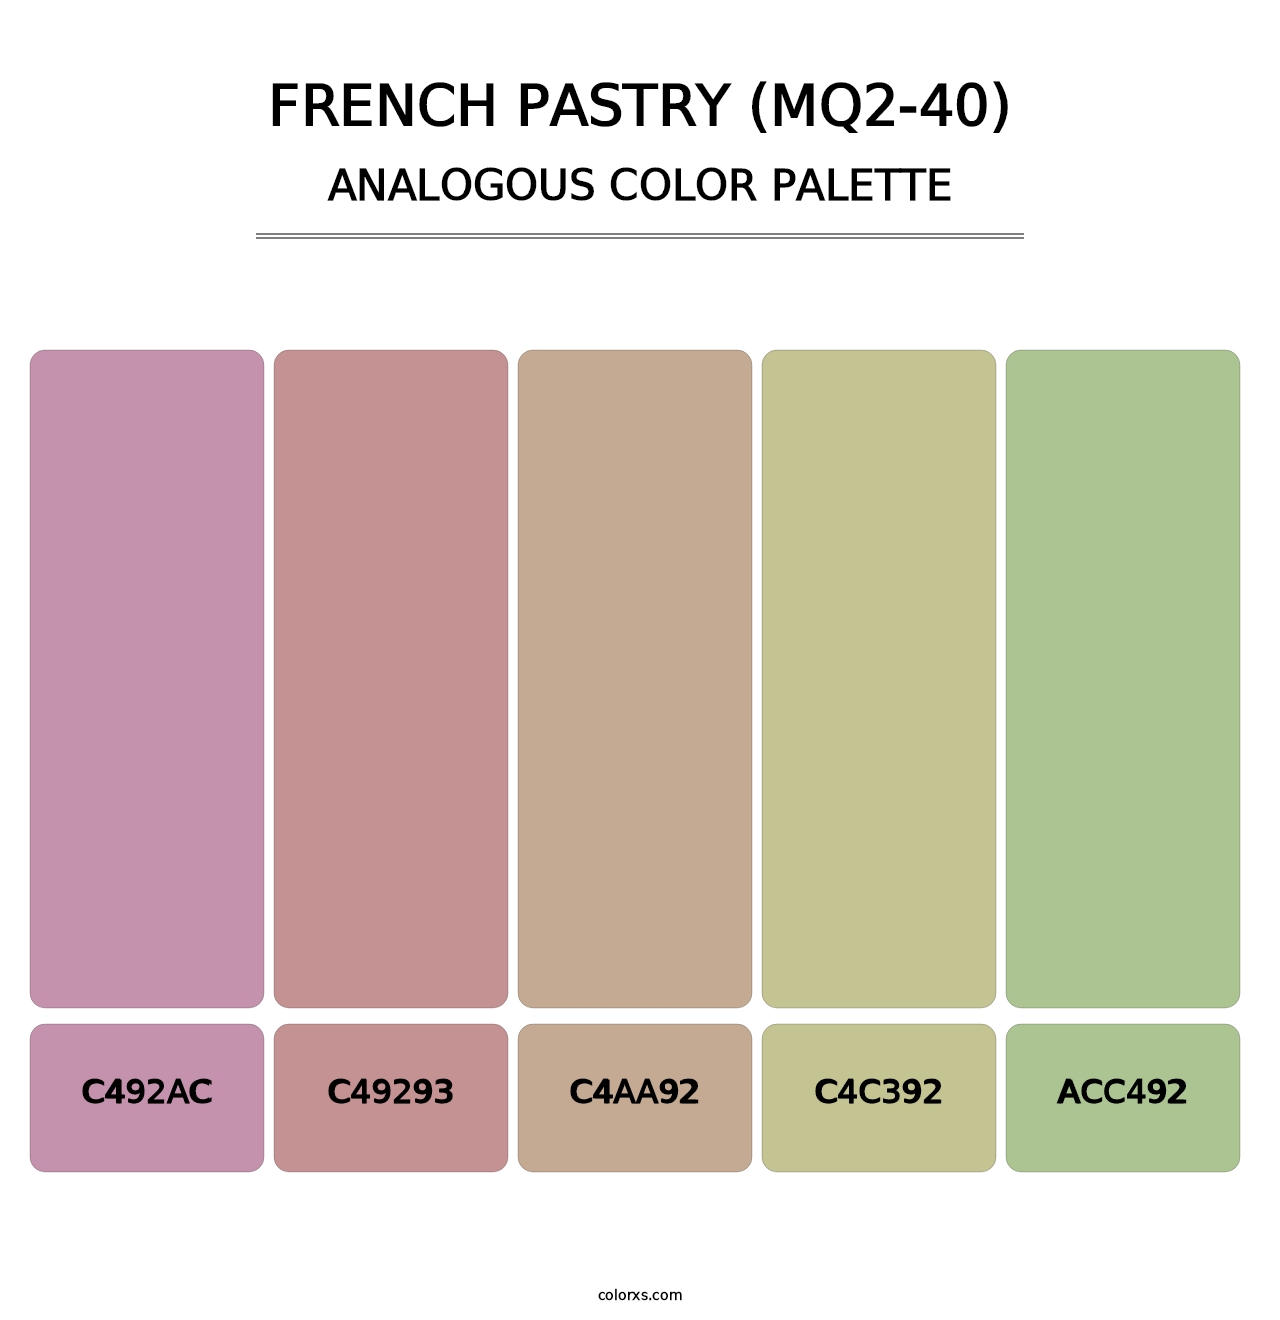 French Pastry (MQ2-40) - Analogous Color Palette